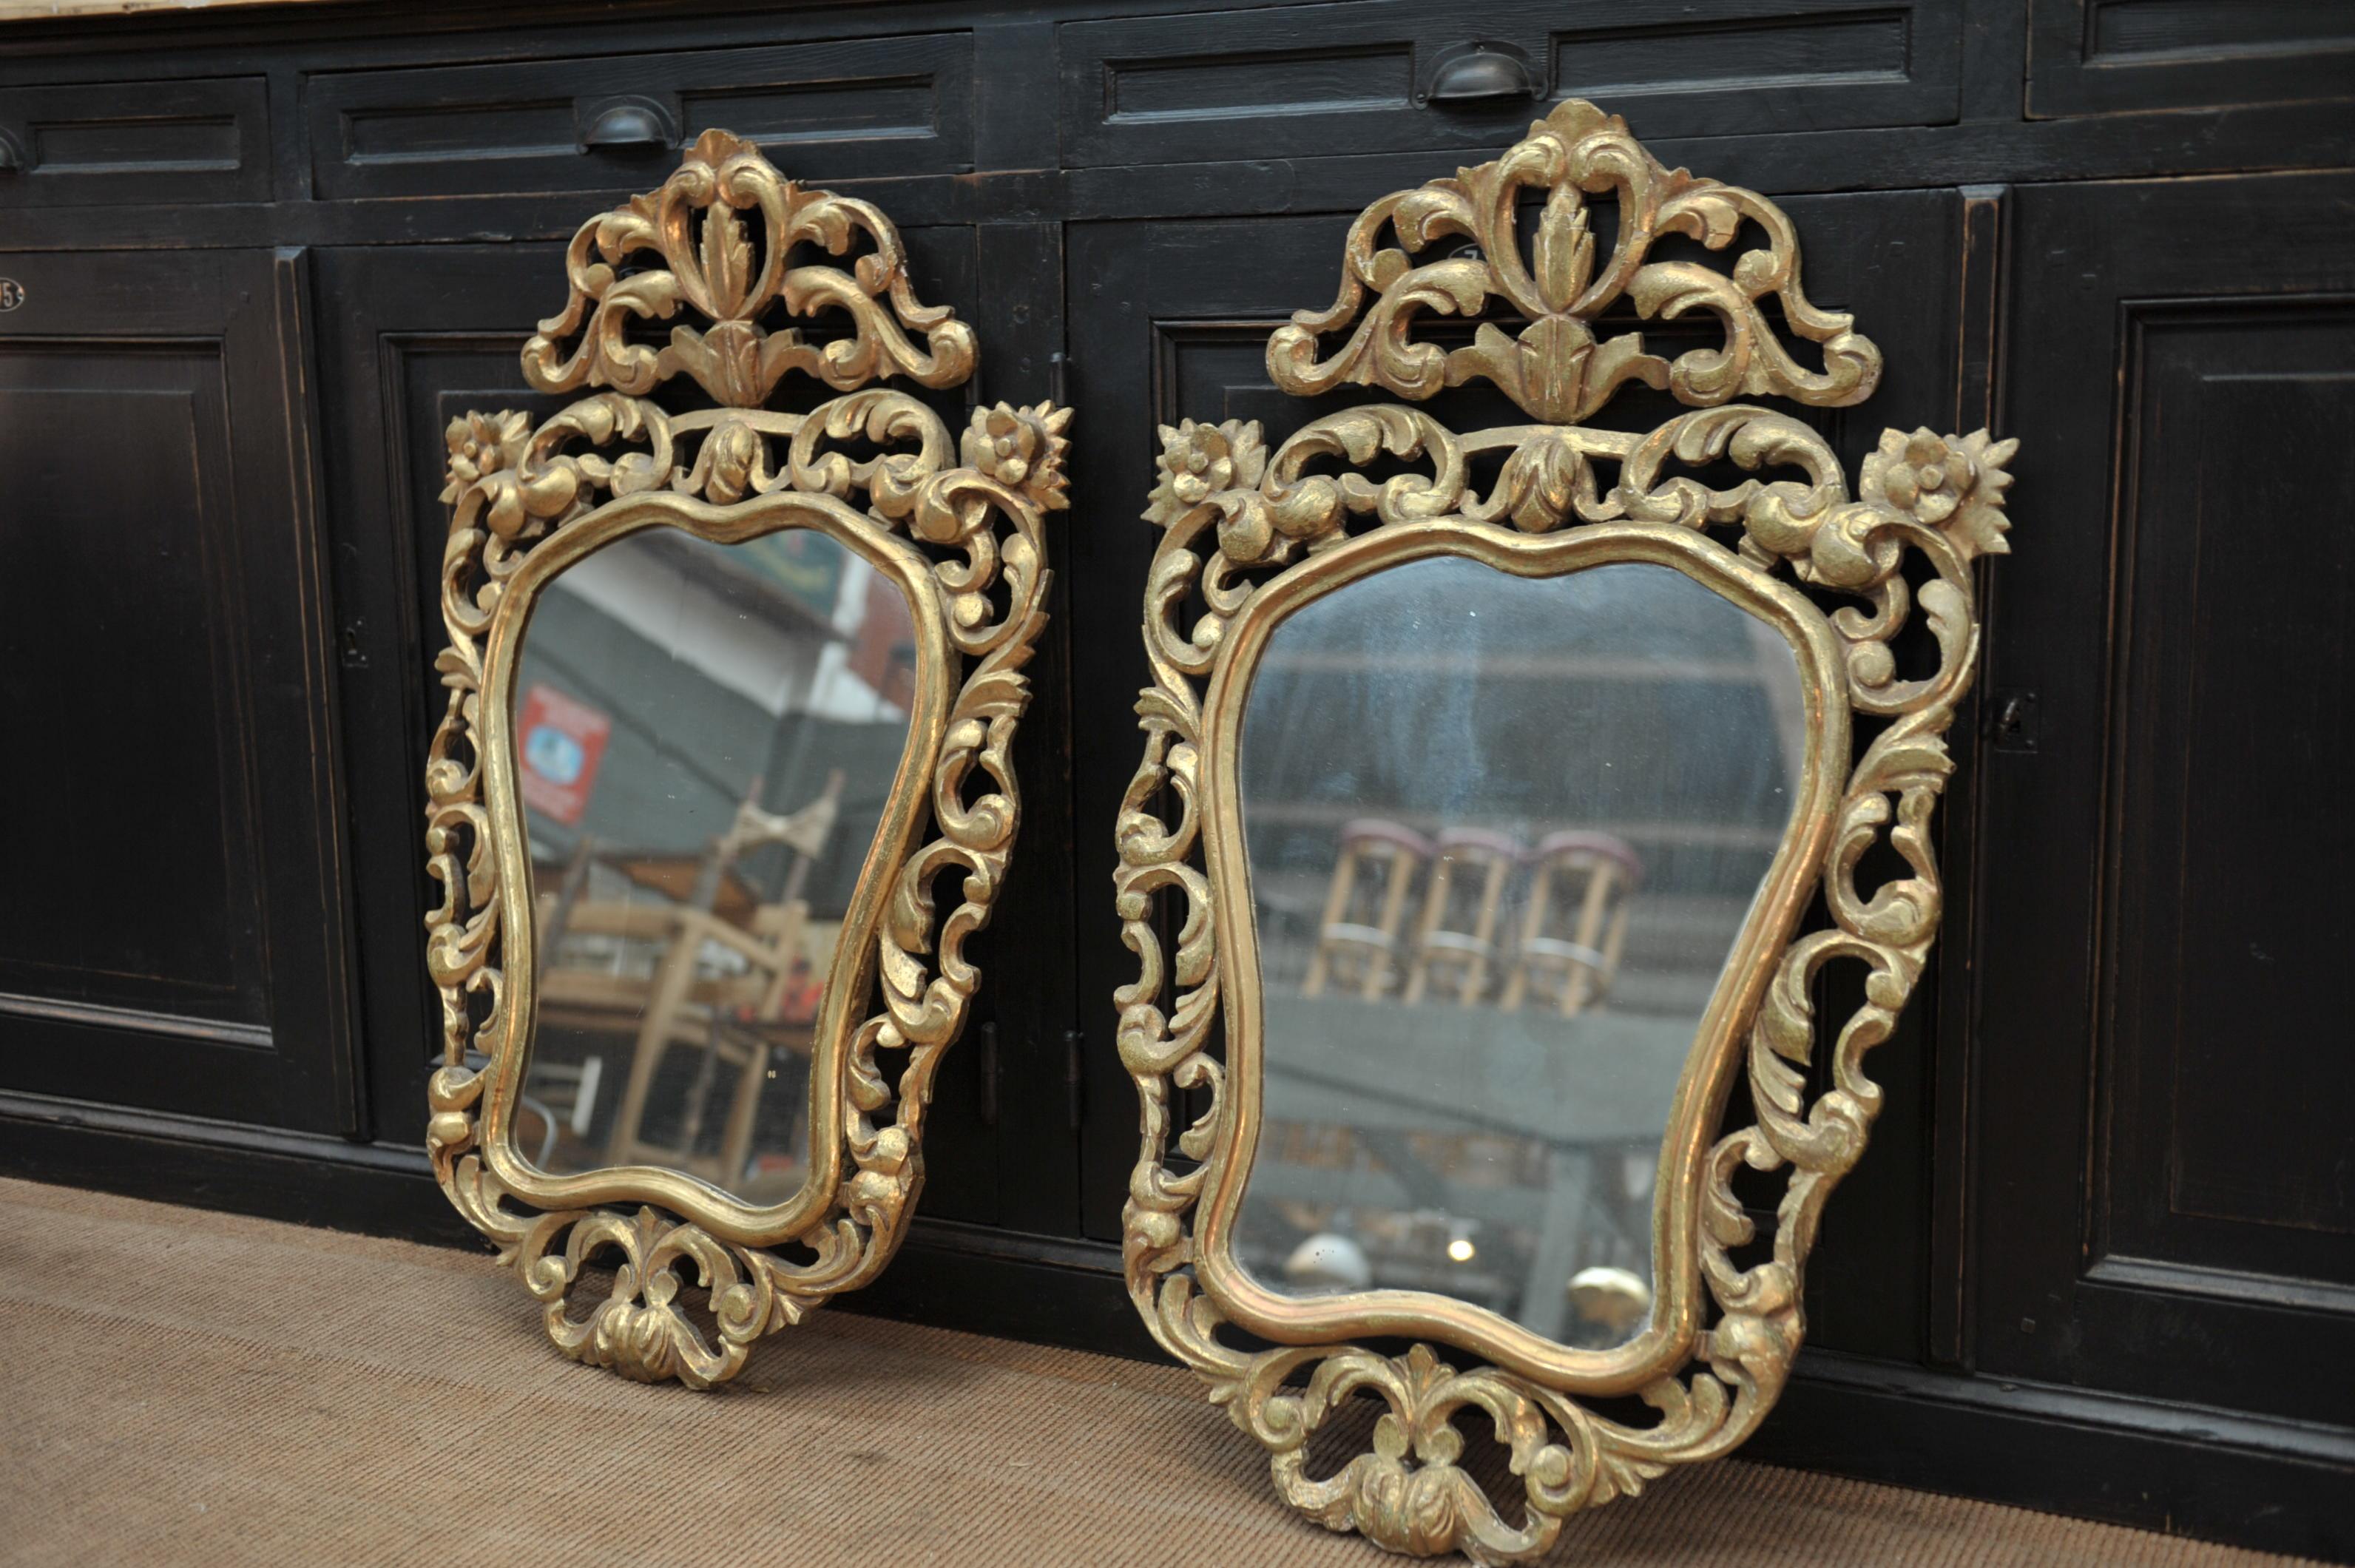 Pair of Louis XV style pine wood gilt mirrors circa 1930 original glass. Weight about 3 kg each.